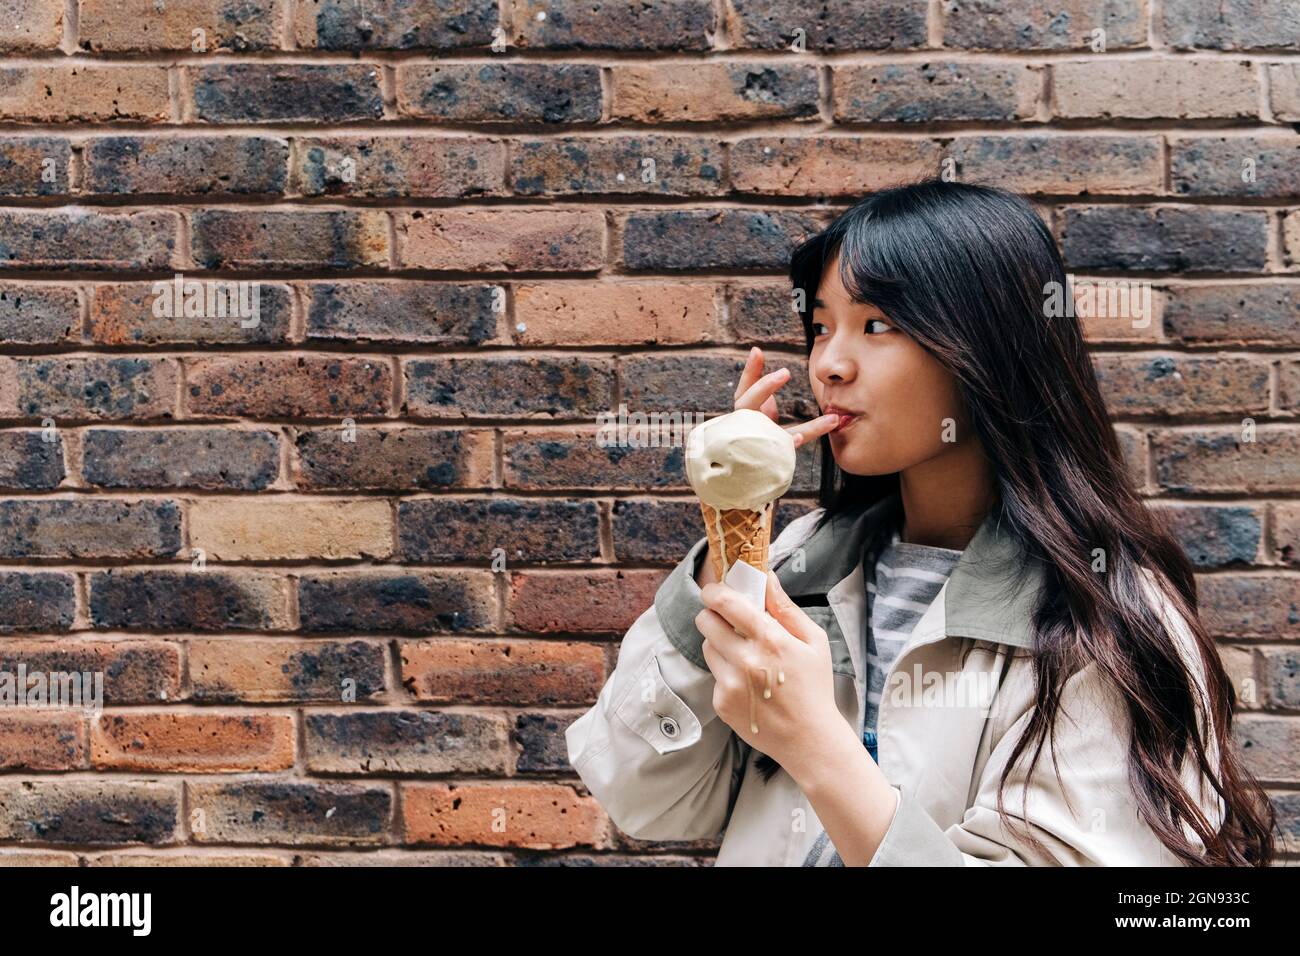 Woman licking finger while holding ice cream in front of brick wall Stock Photo